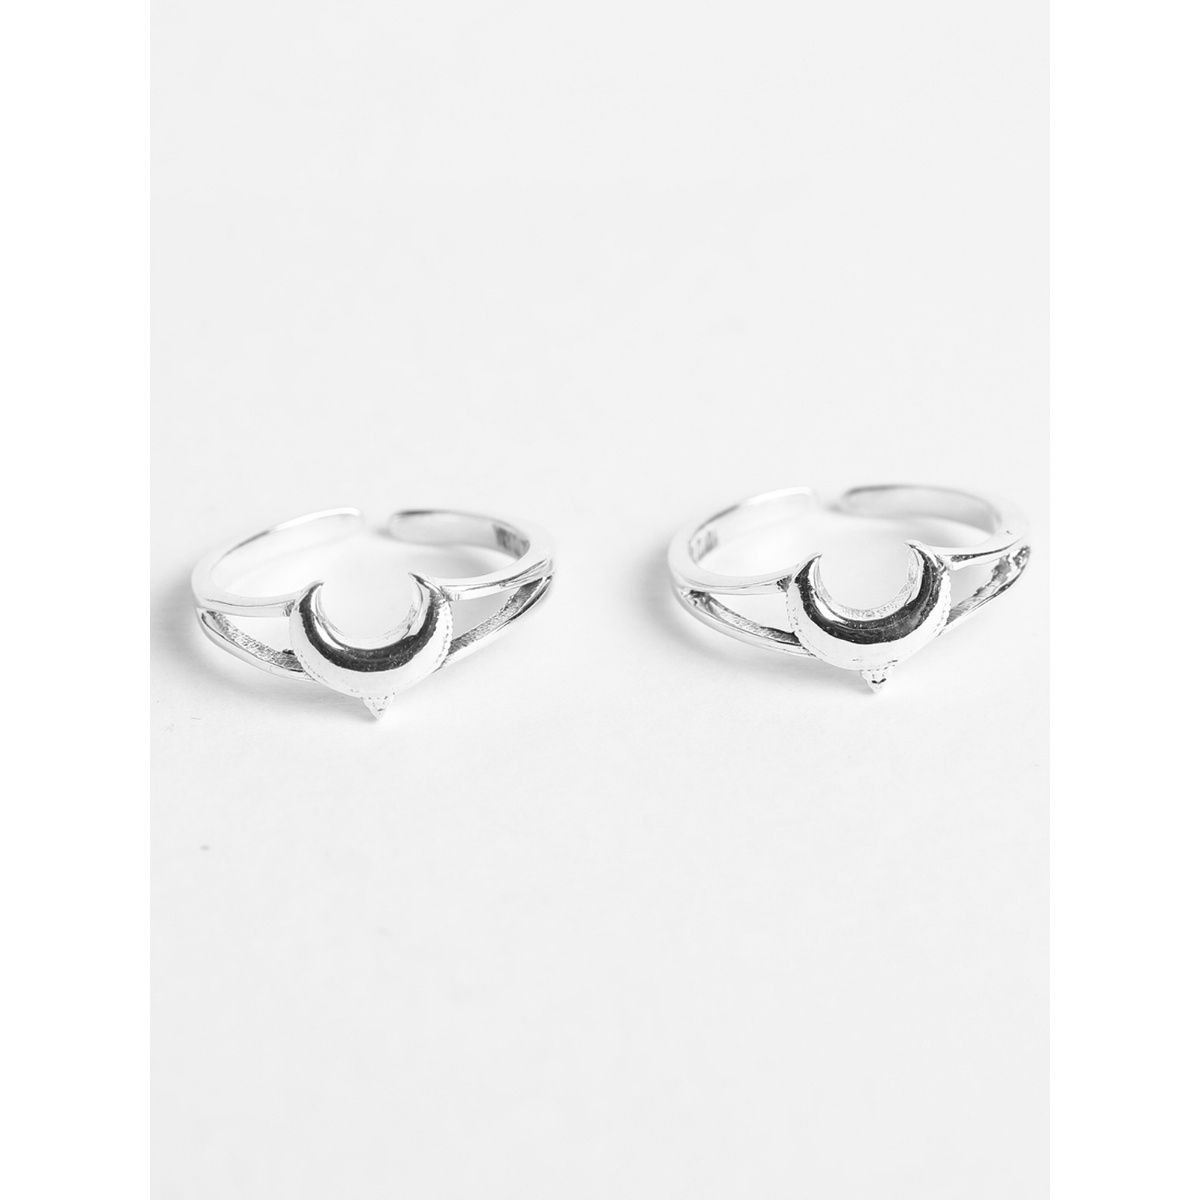 Buy CLARA 925 Silver Size Adjustable Moon Toe Rings Pair Gift For 